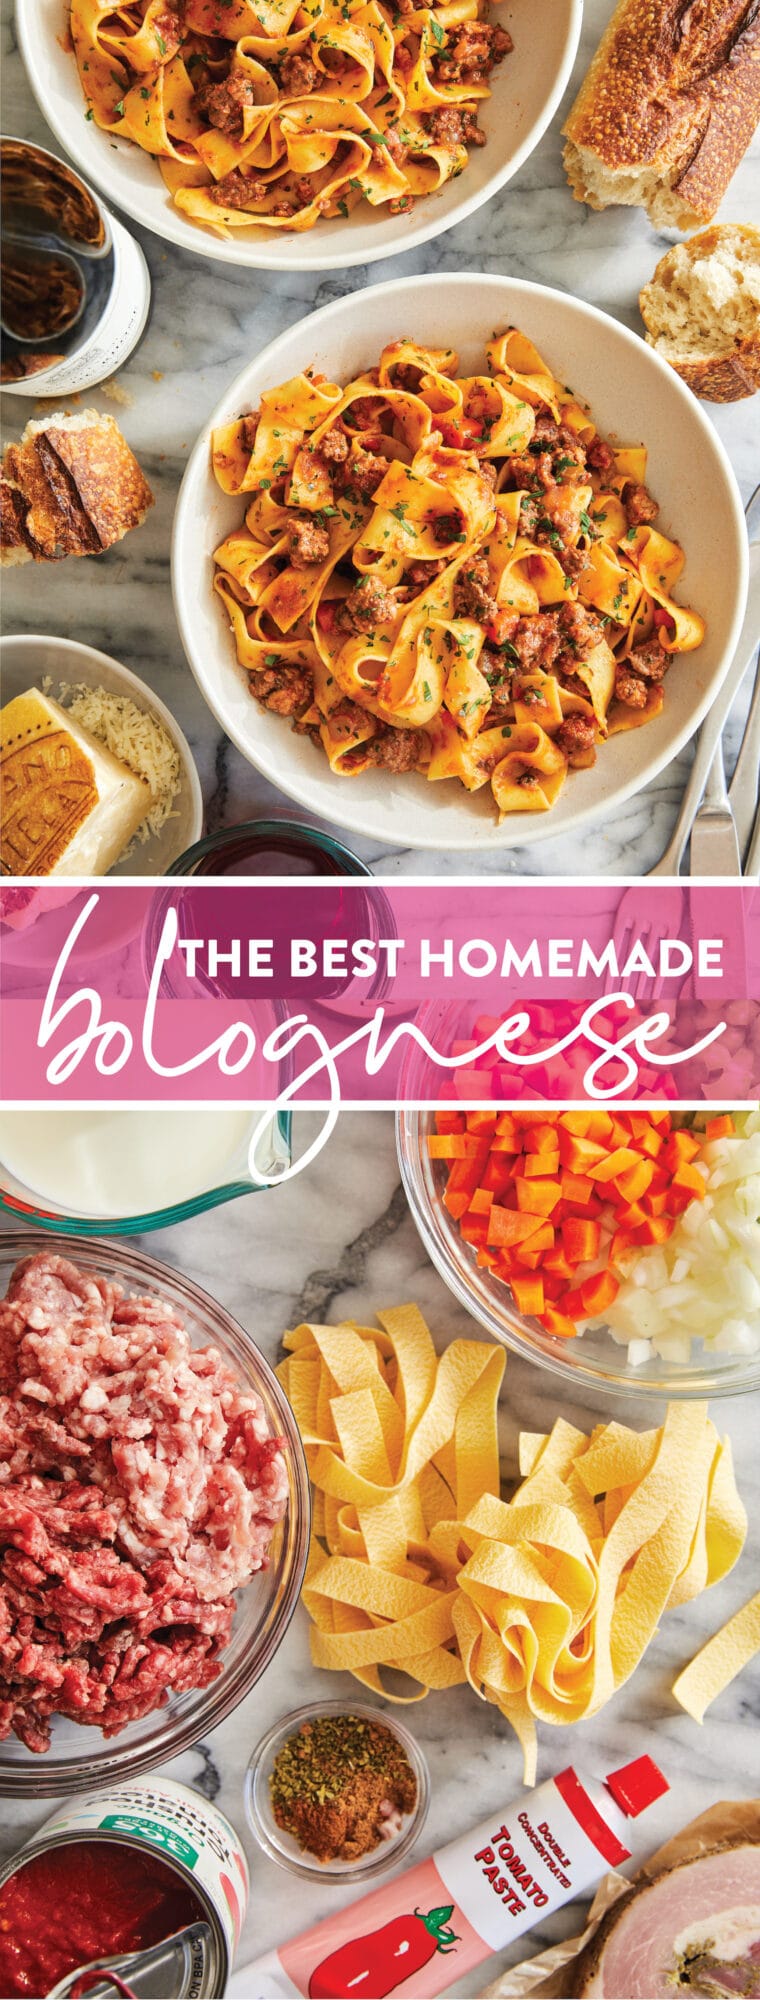 The Best Homemade Bolognese - THE BEST (freezable) Bolognese Sauce!  So rich, so hearty, so perfect.  Serve over pasta or gnocchi! 